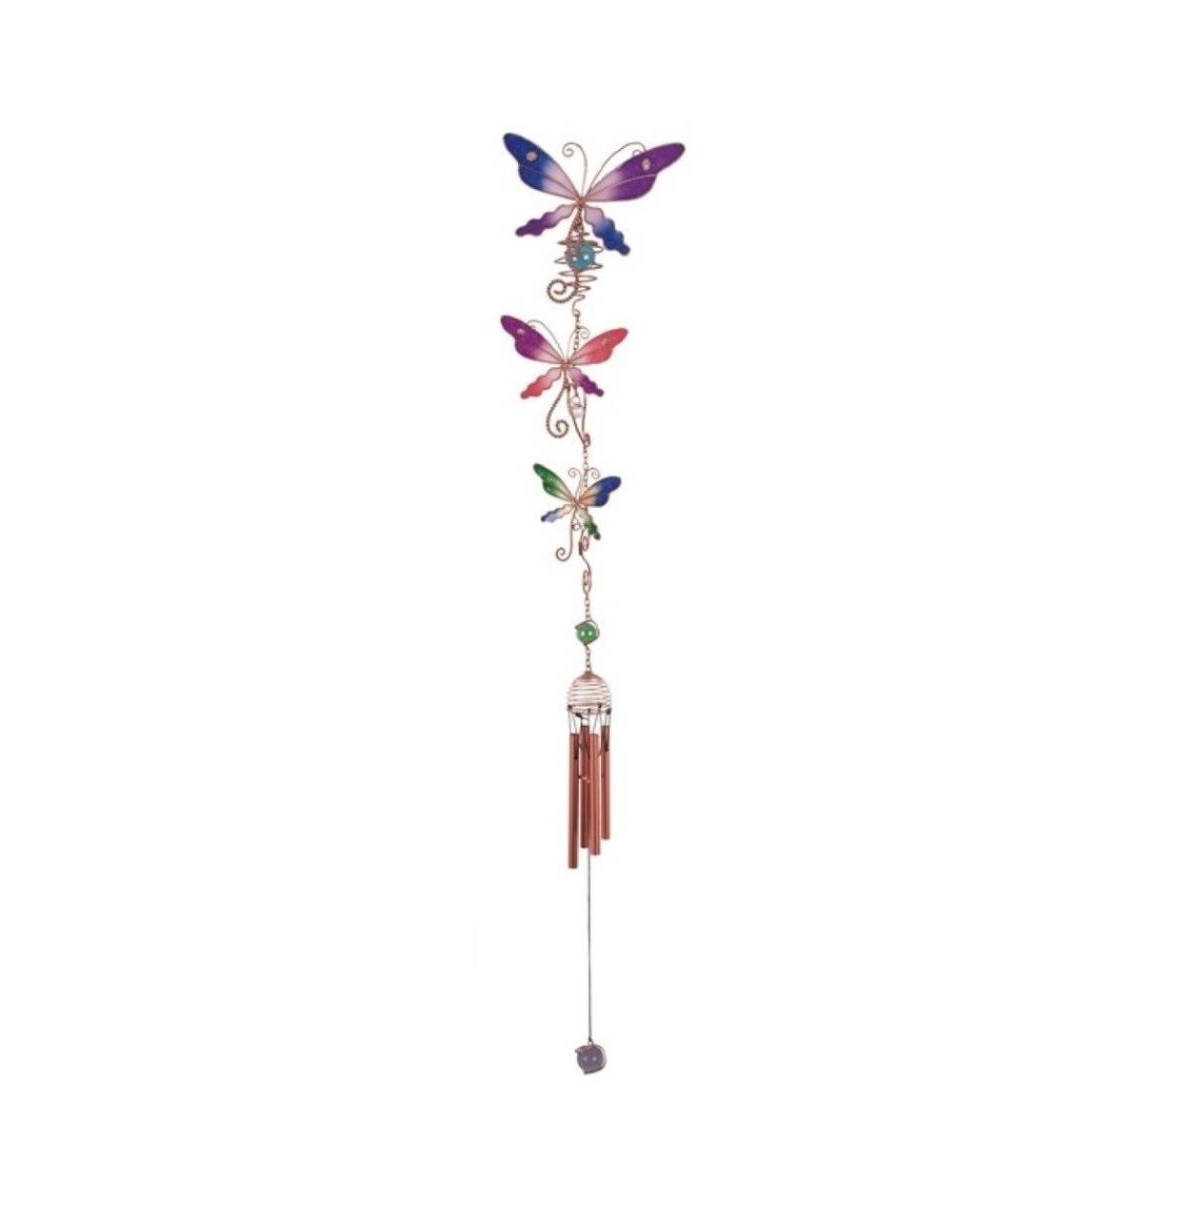 3-Dragonfly Wind Chime with Copper Gem Home Decor Perfect Gift for House Warming, Holidays and Birthdays - Multi